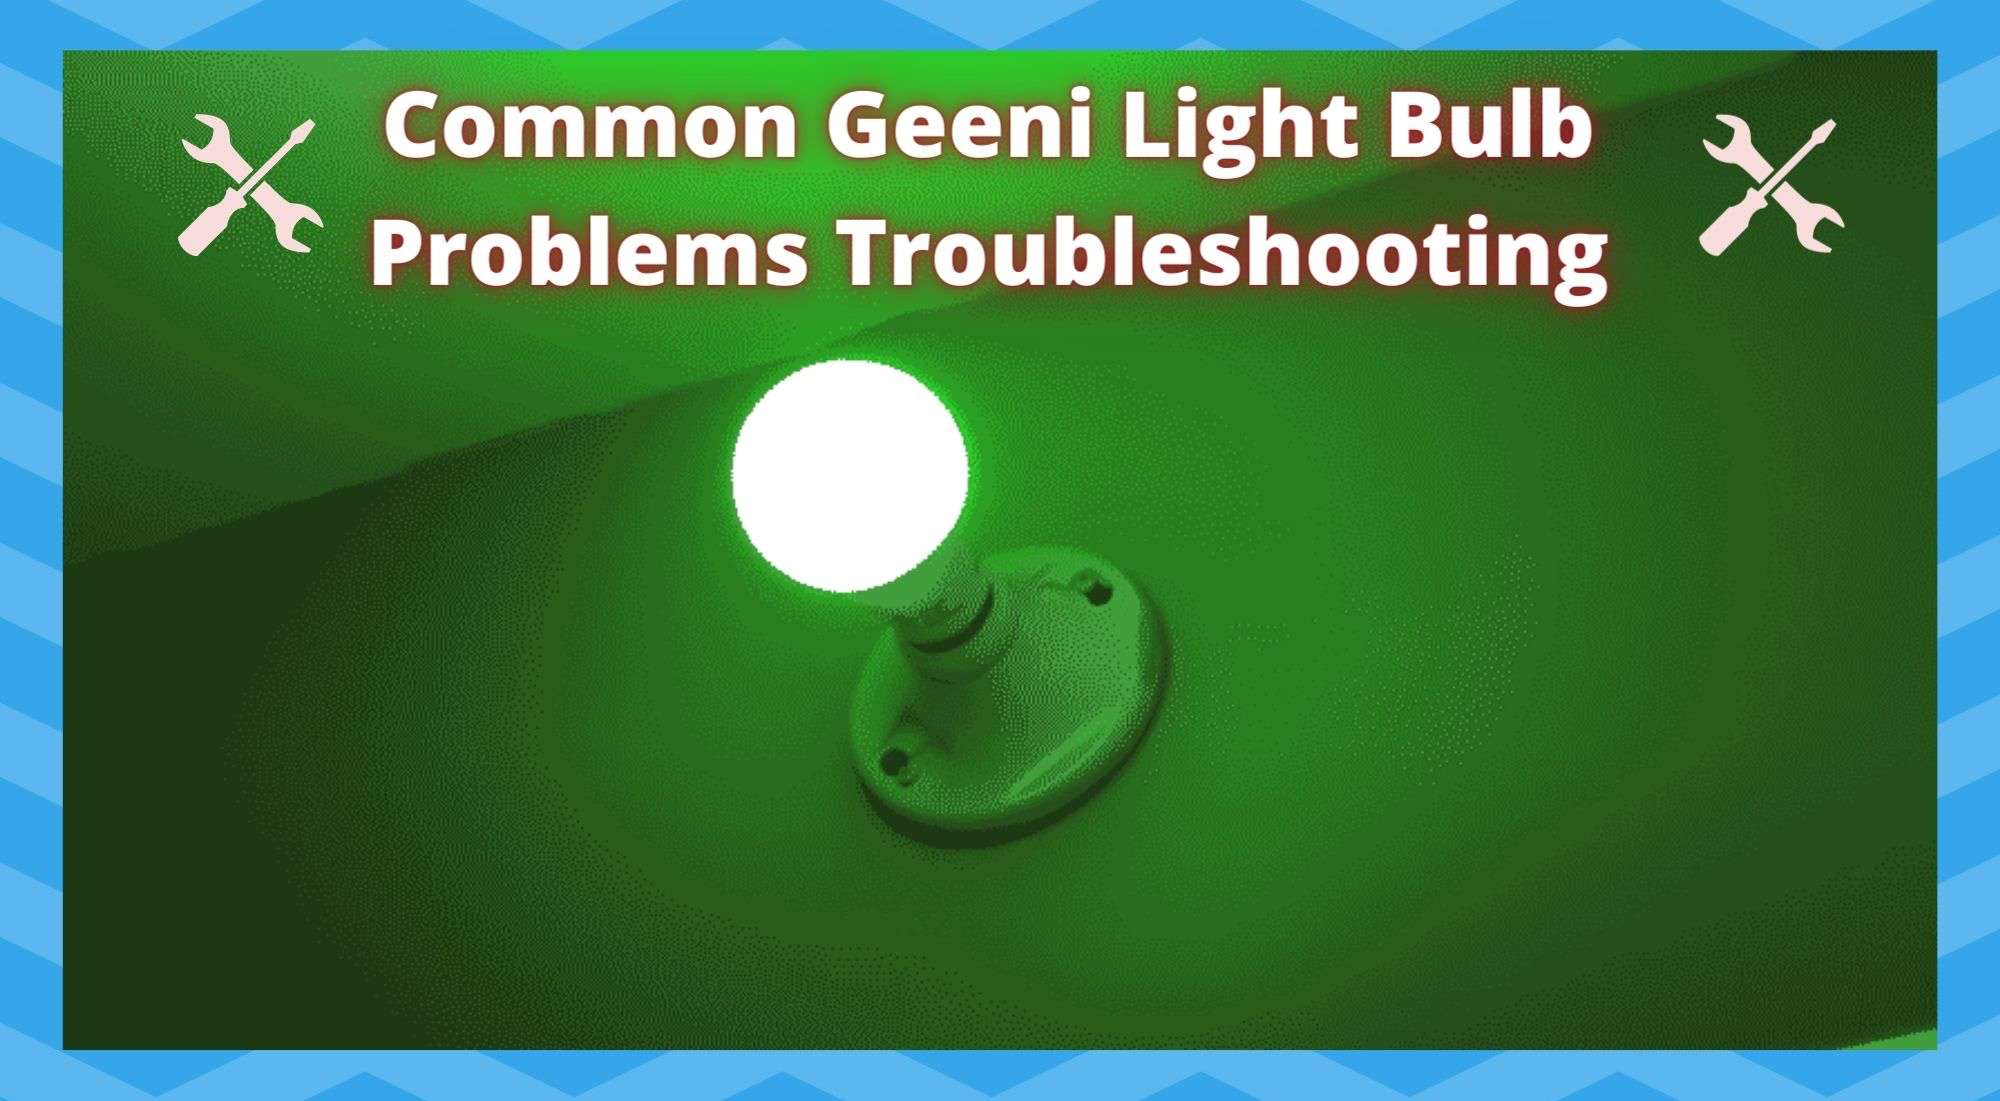 Common Geeni Light Bulb Problems Troubleshooting